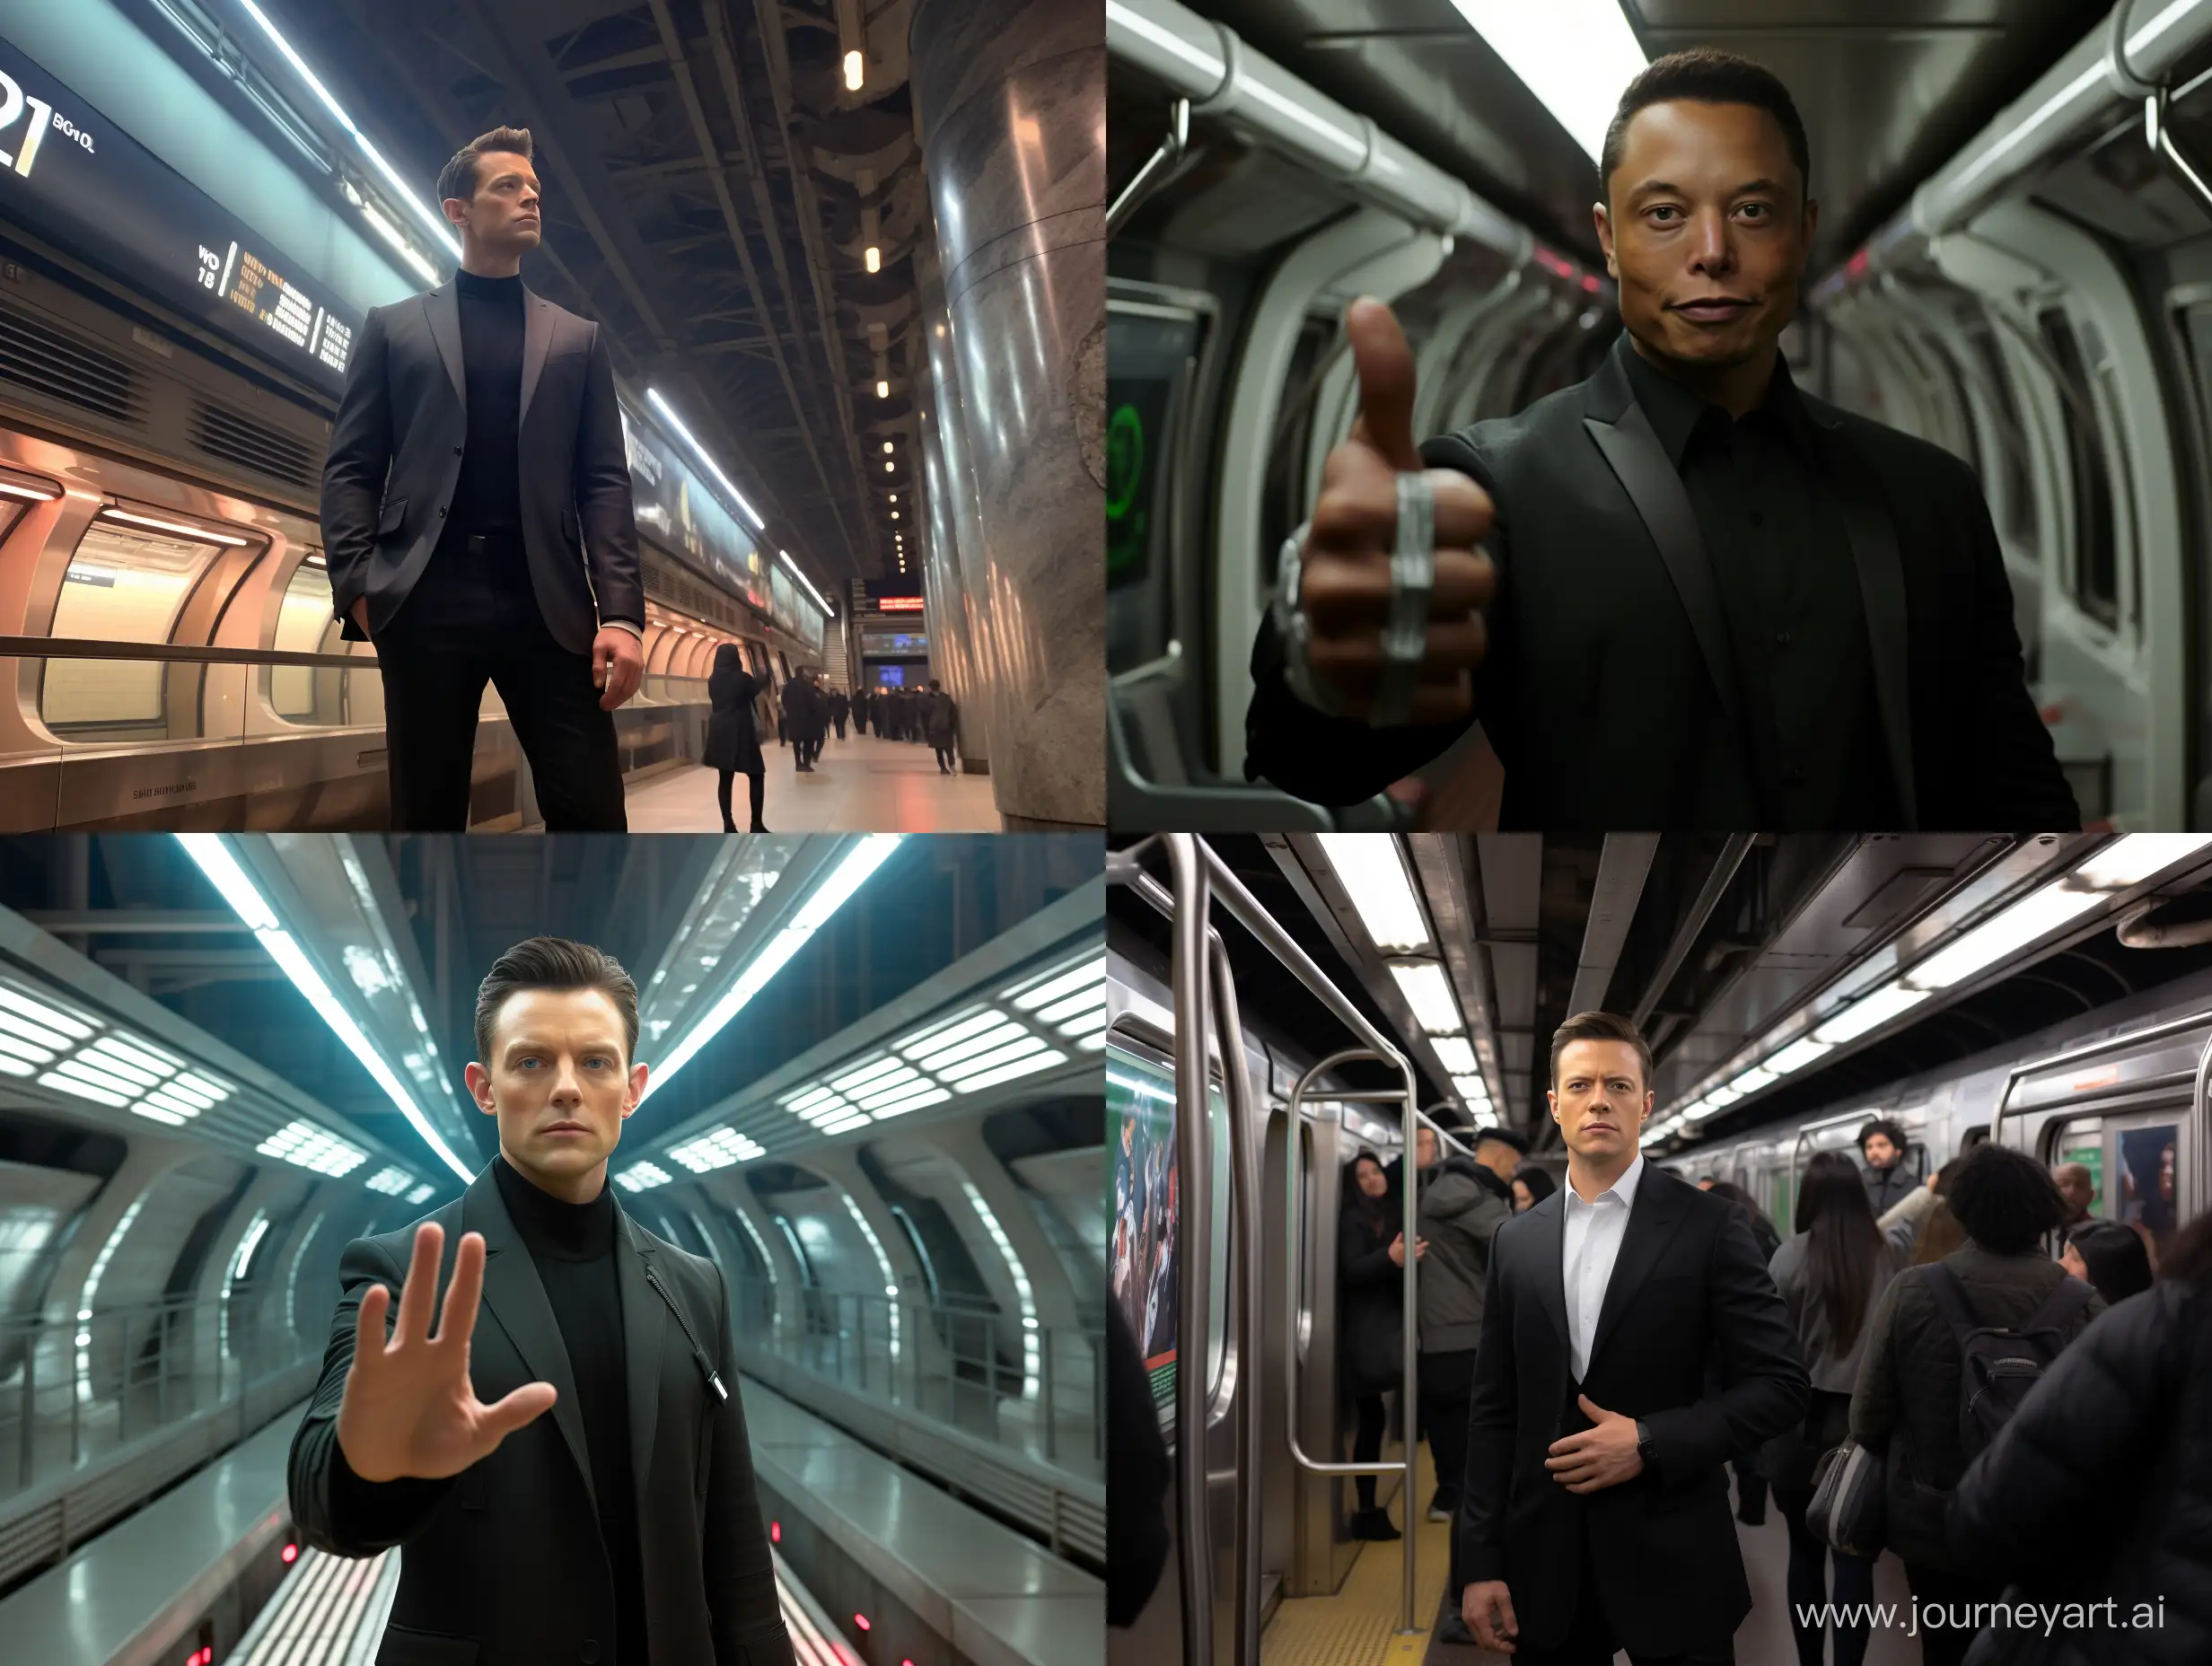 Elon-Musk-in-Neos-Attire-Poses-like-Jobs-in-Subway-Photorealism